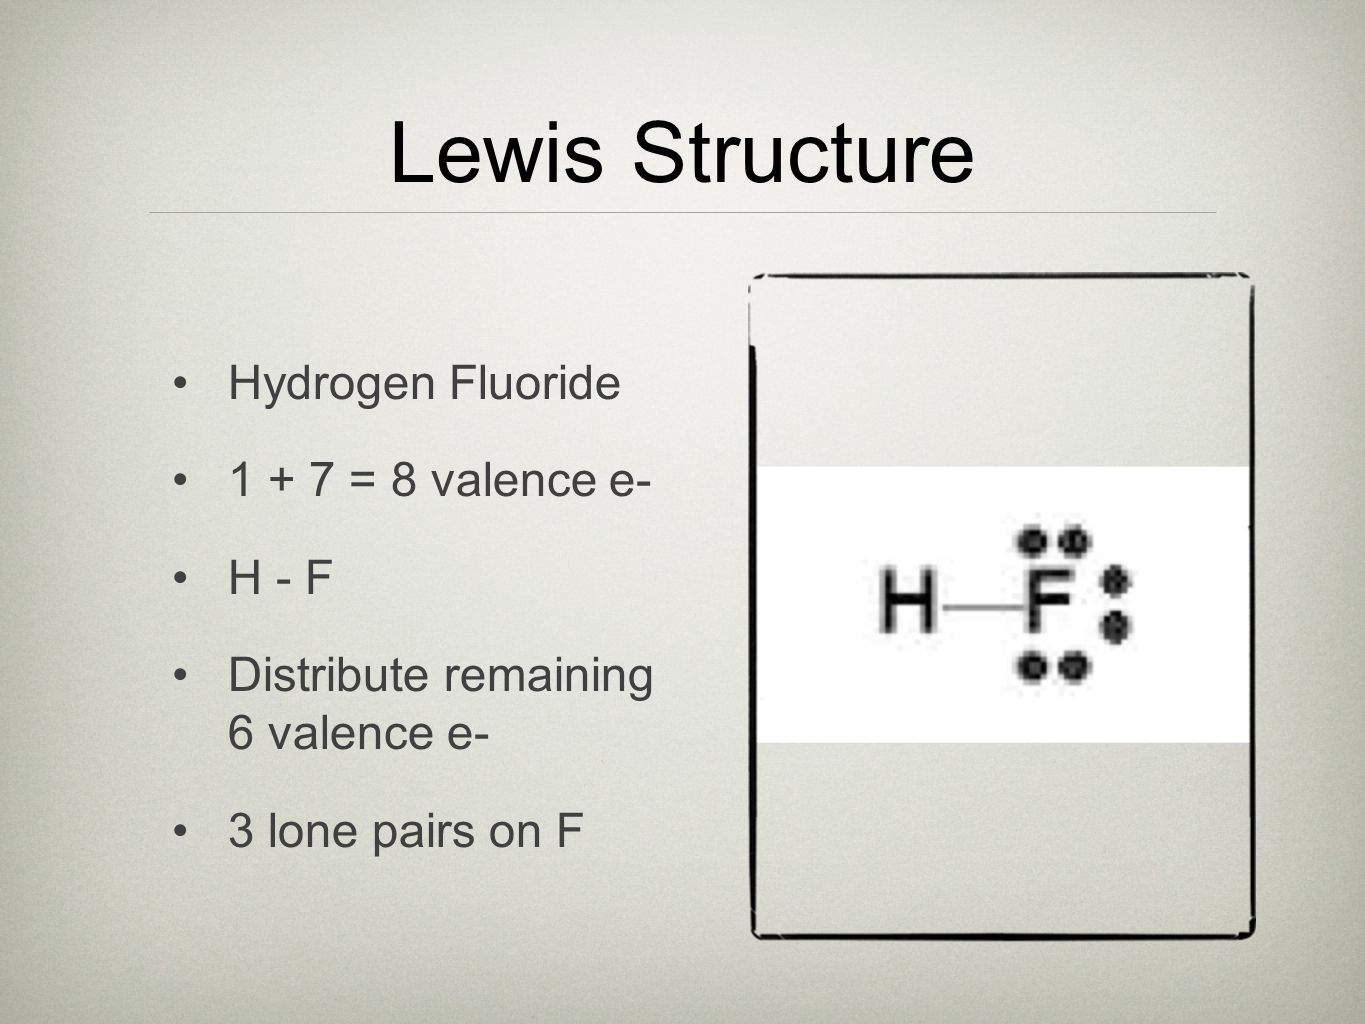 Lewis Structure Hydrogen Fluoride = 8 valence e- H - F